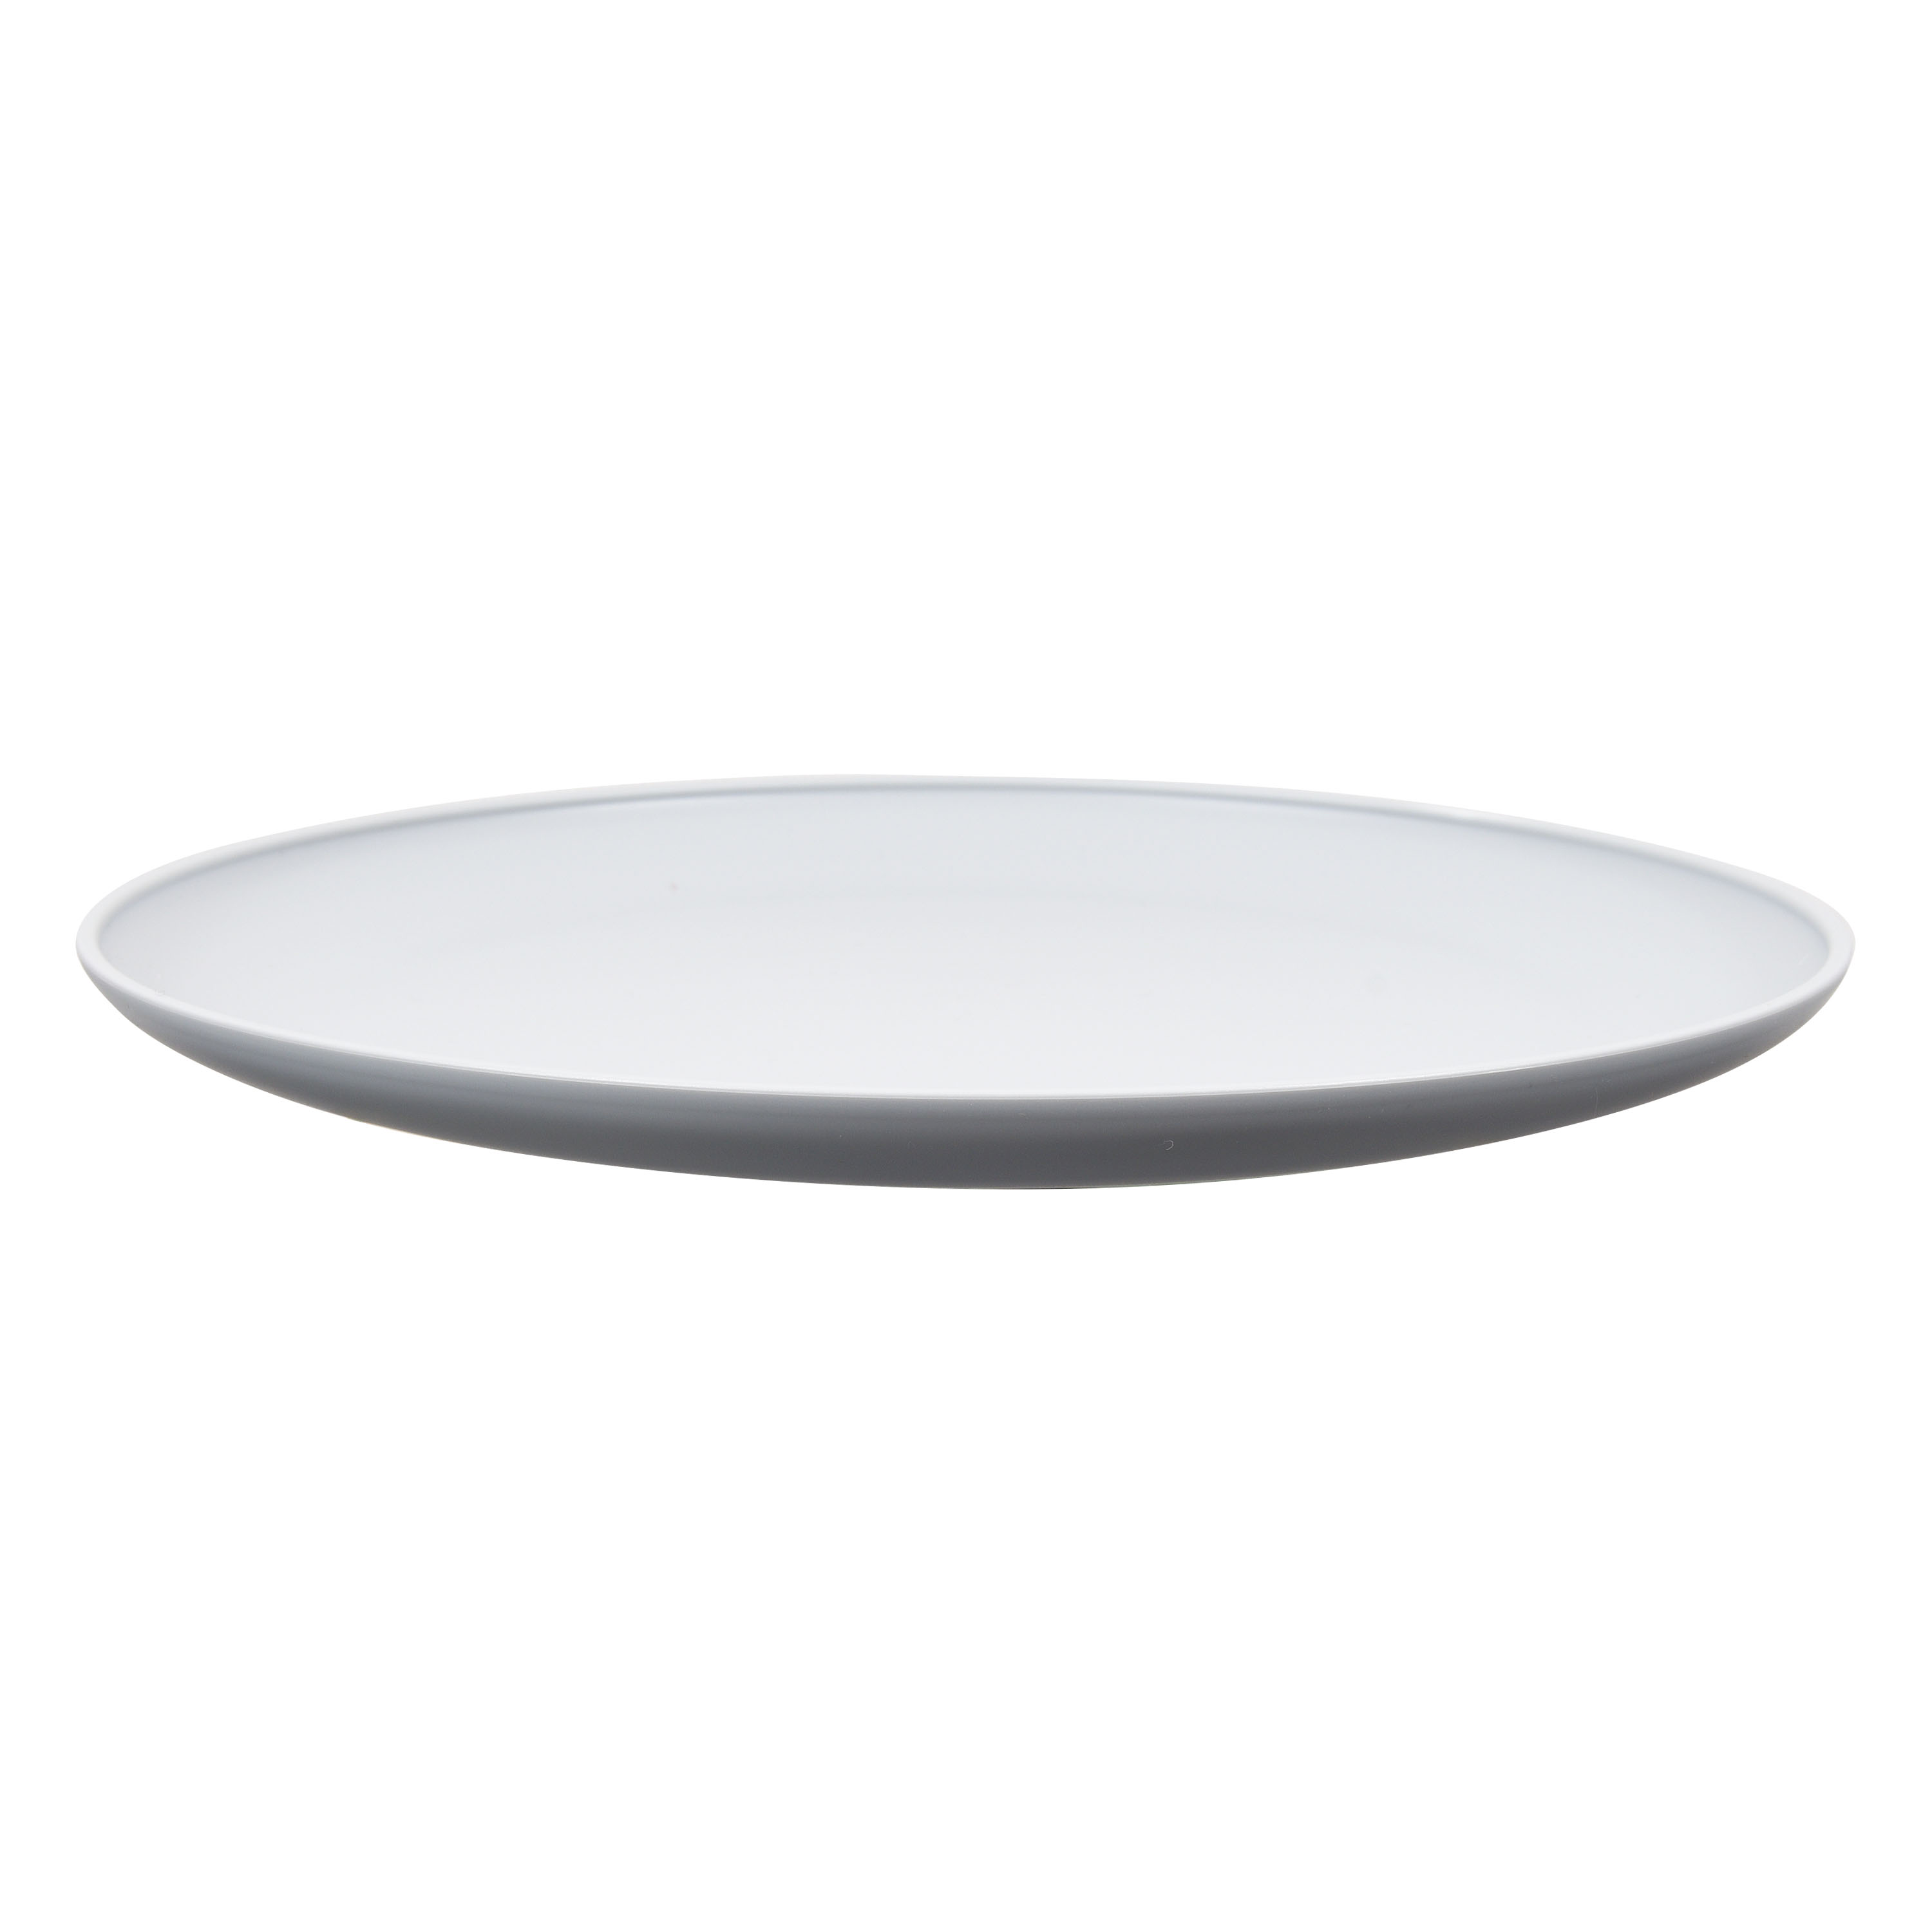 Mainstays - Gray Round Plastic Plate, 10.5 inch - image 3 of 4